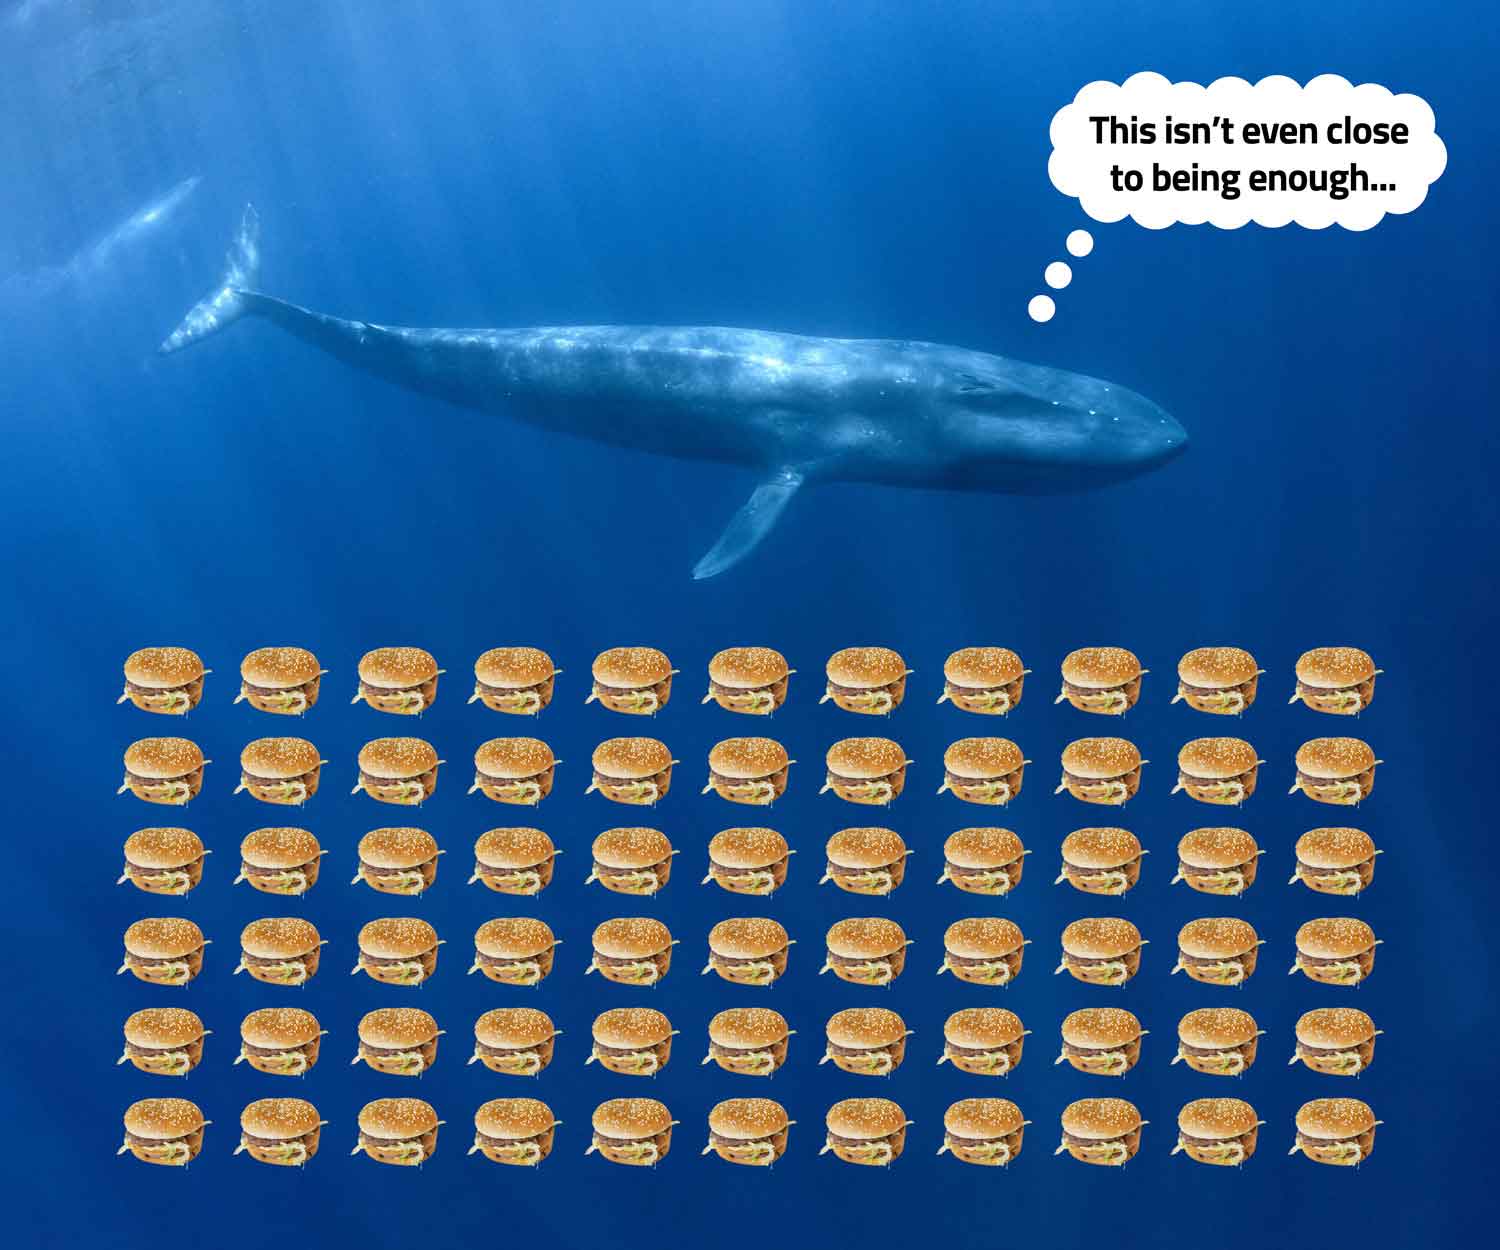 A blue whale looks at several Big Macs and thinks “This isn’t even close to being enough.”